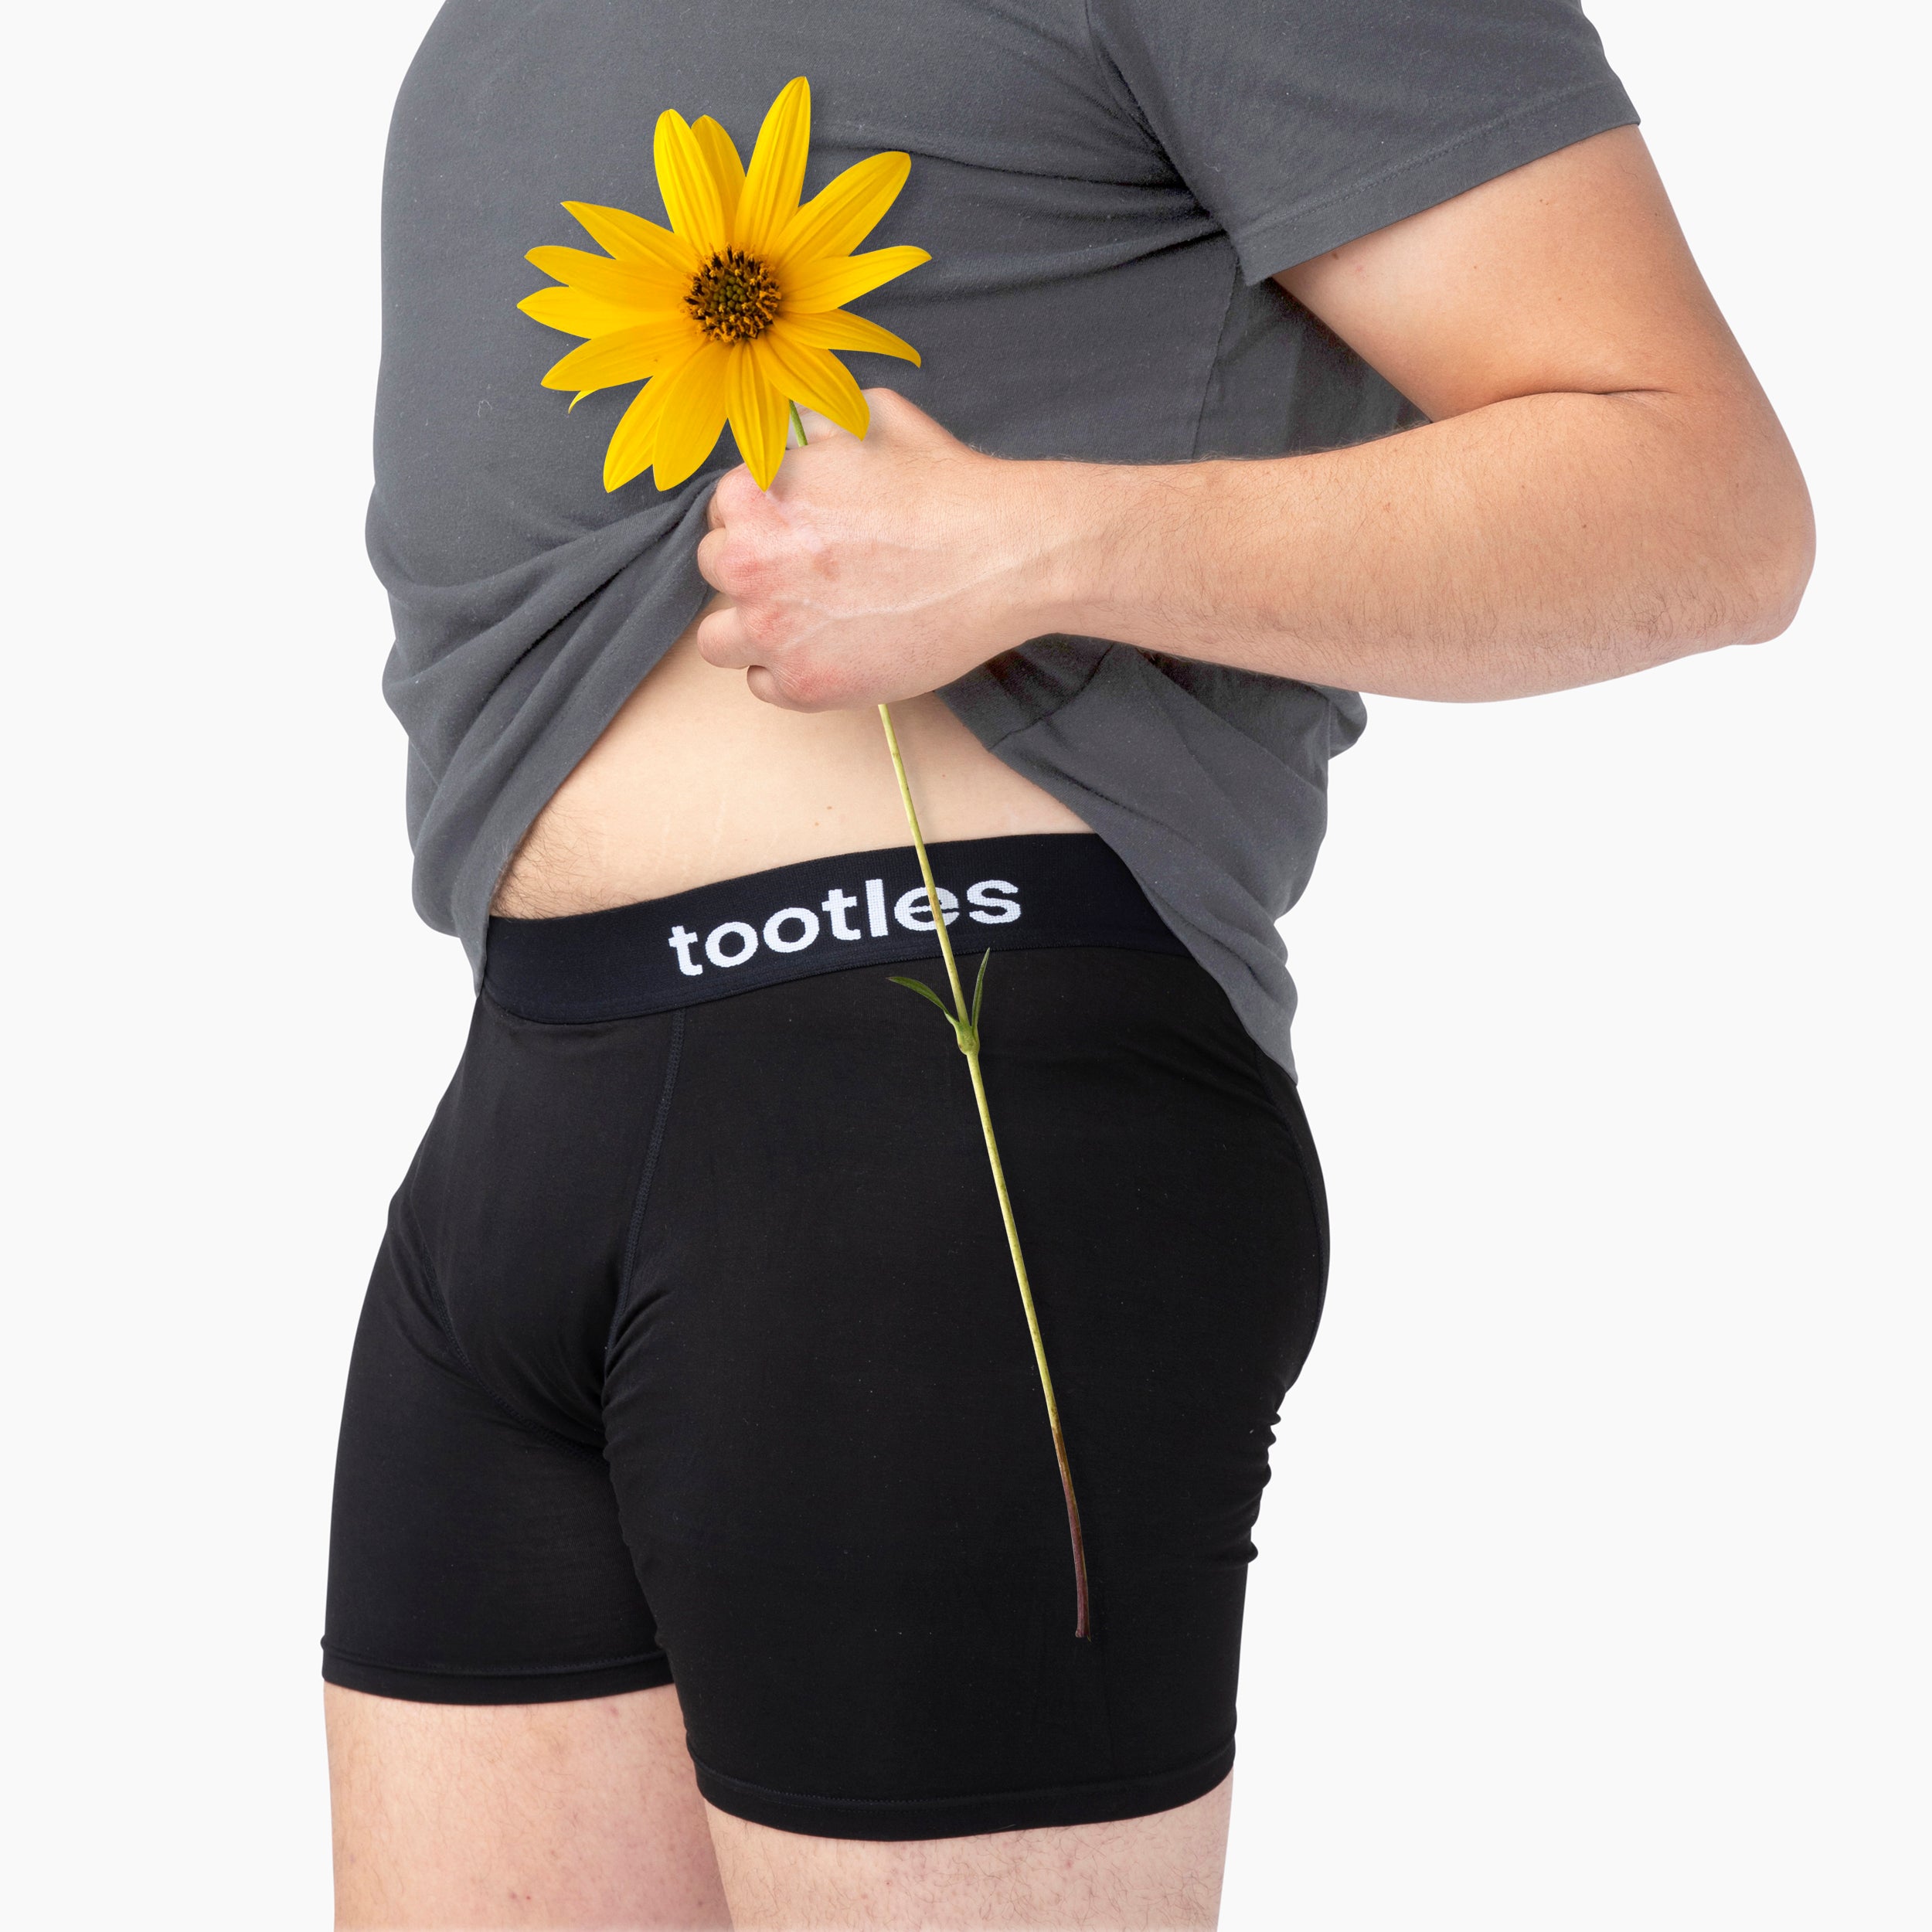 Stitches Medical TOOTLES-Womens Fart Filtering Brazil